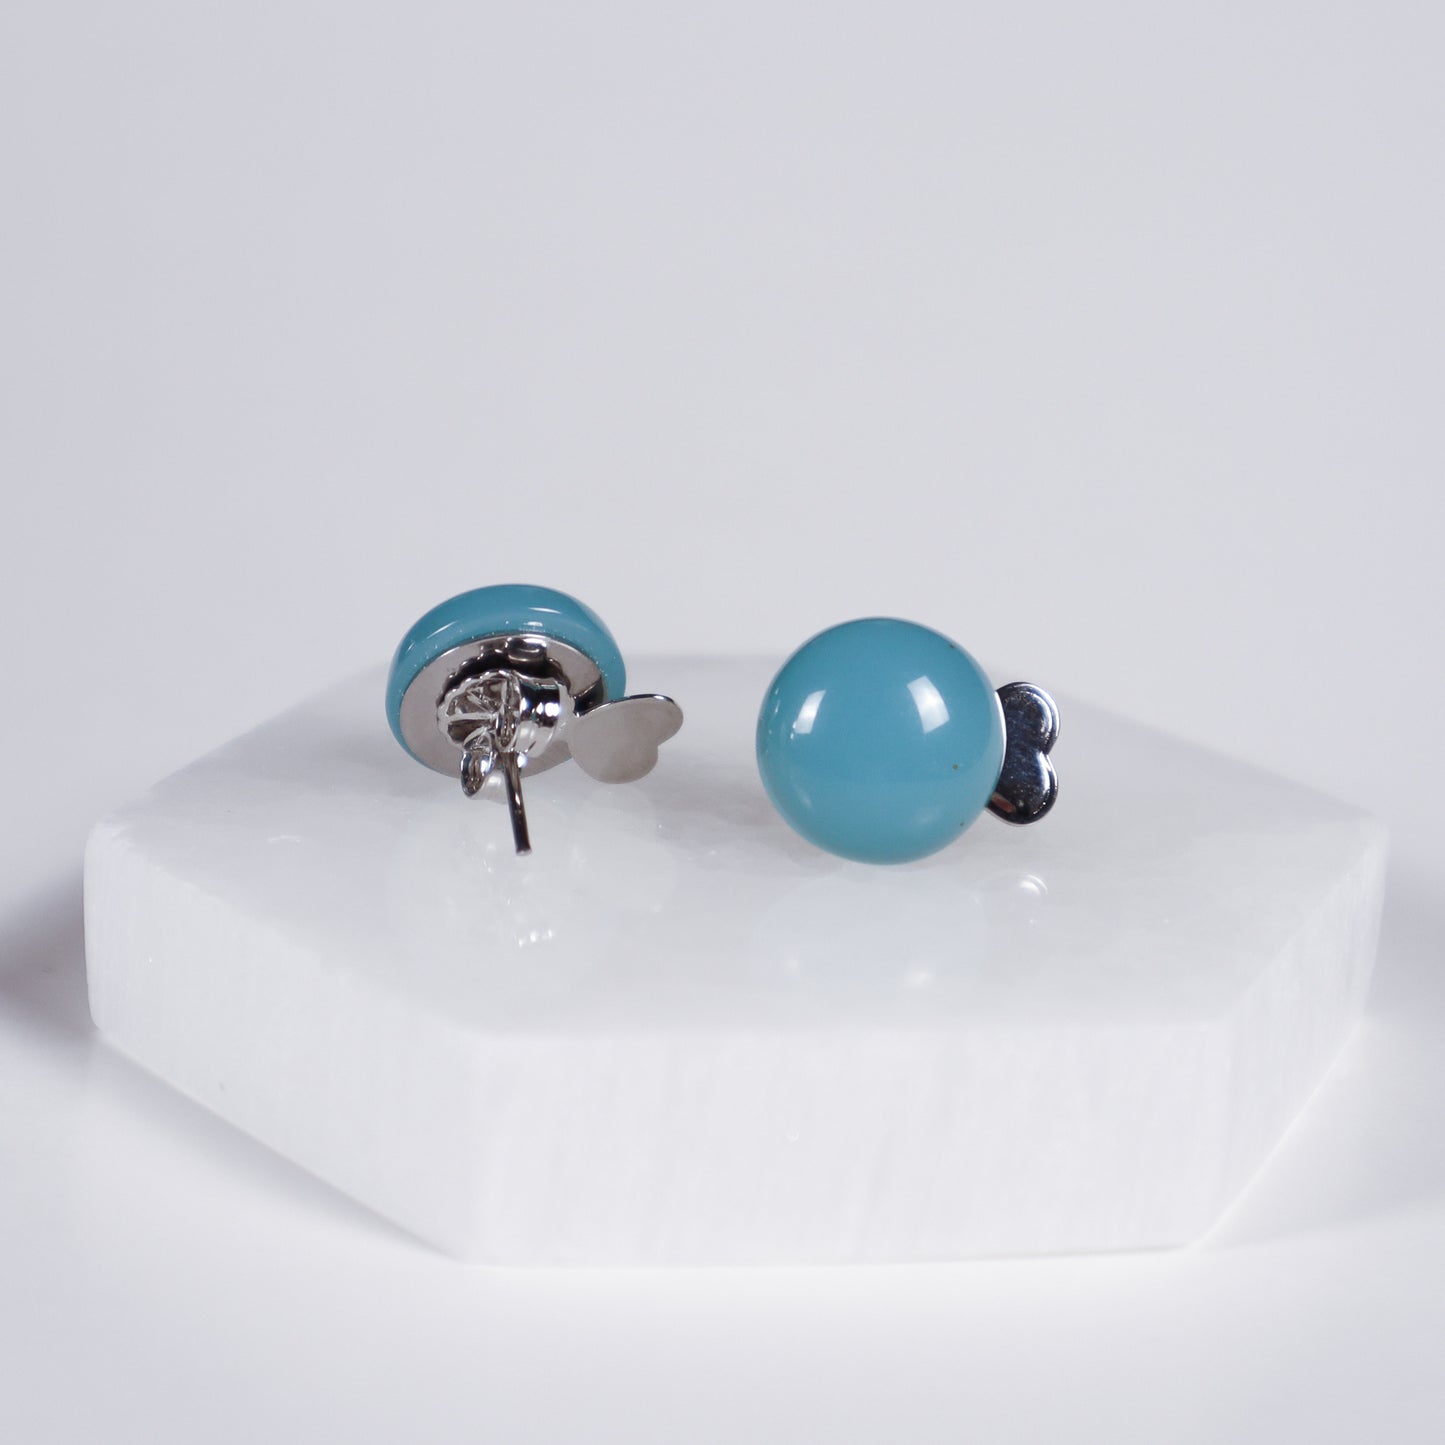 Mini Button Earrings - Turquoise Clear